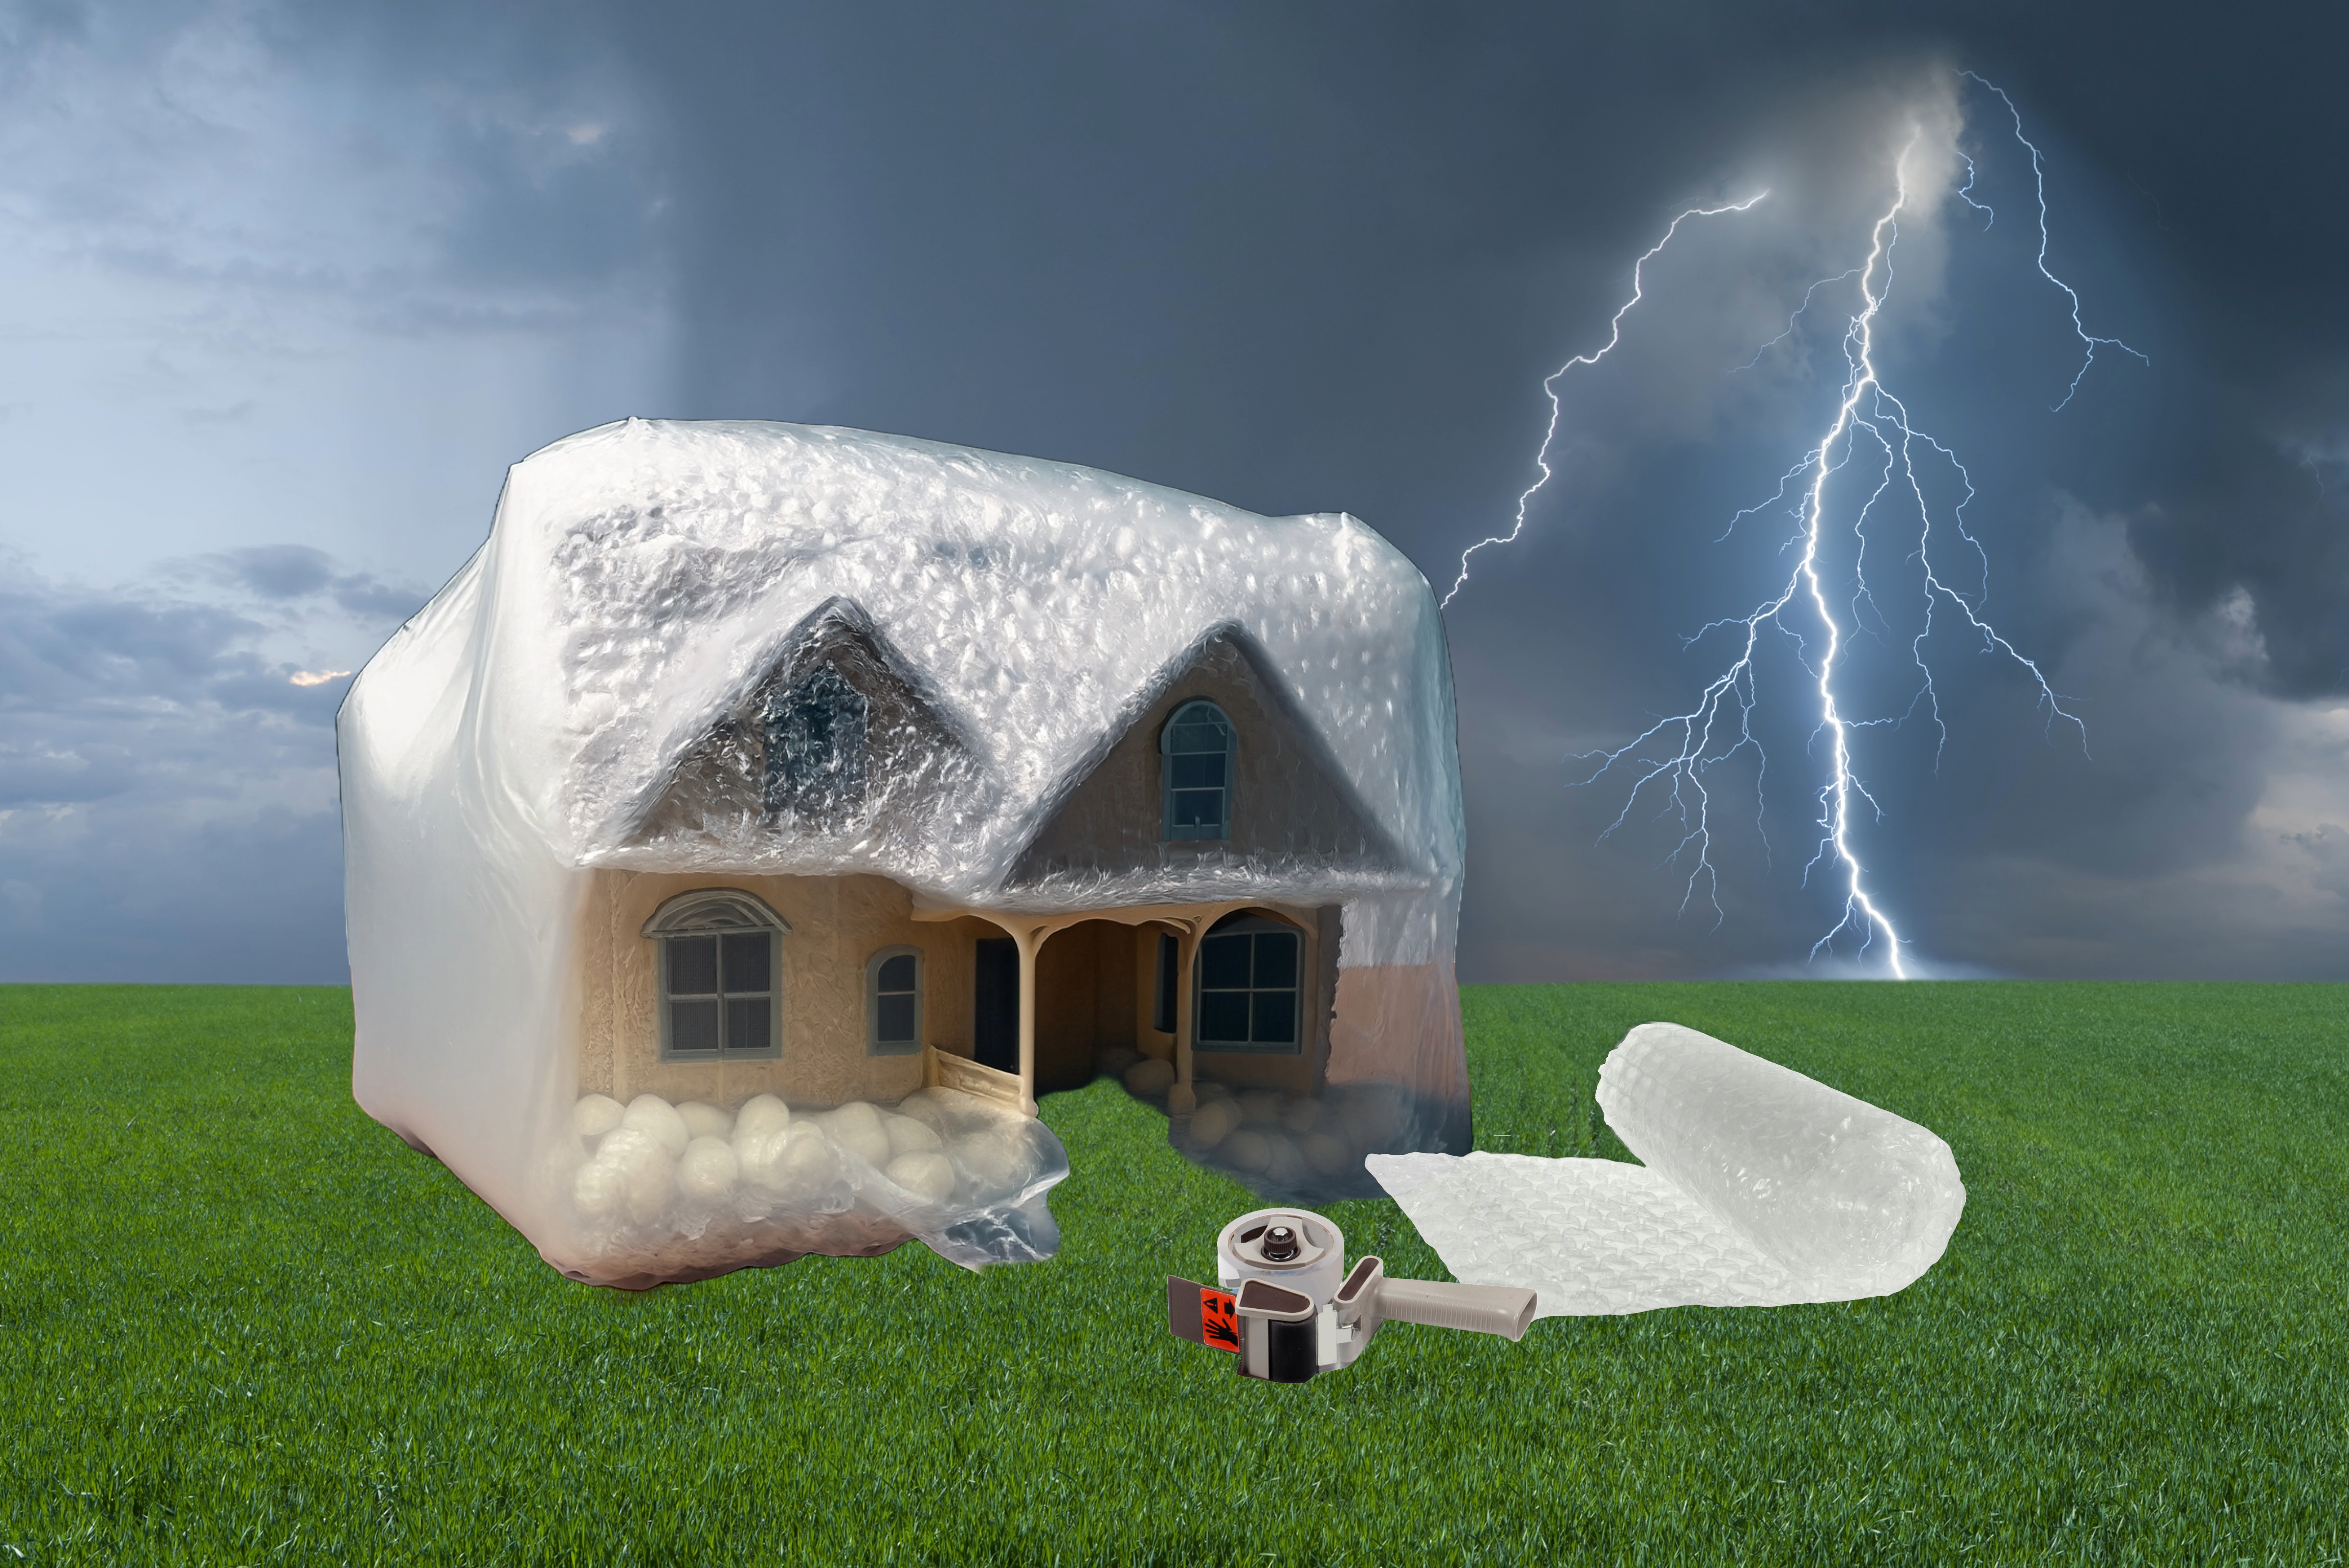 Stormproof Your Roof: 5 Ways to Prepare For Storm Season